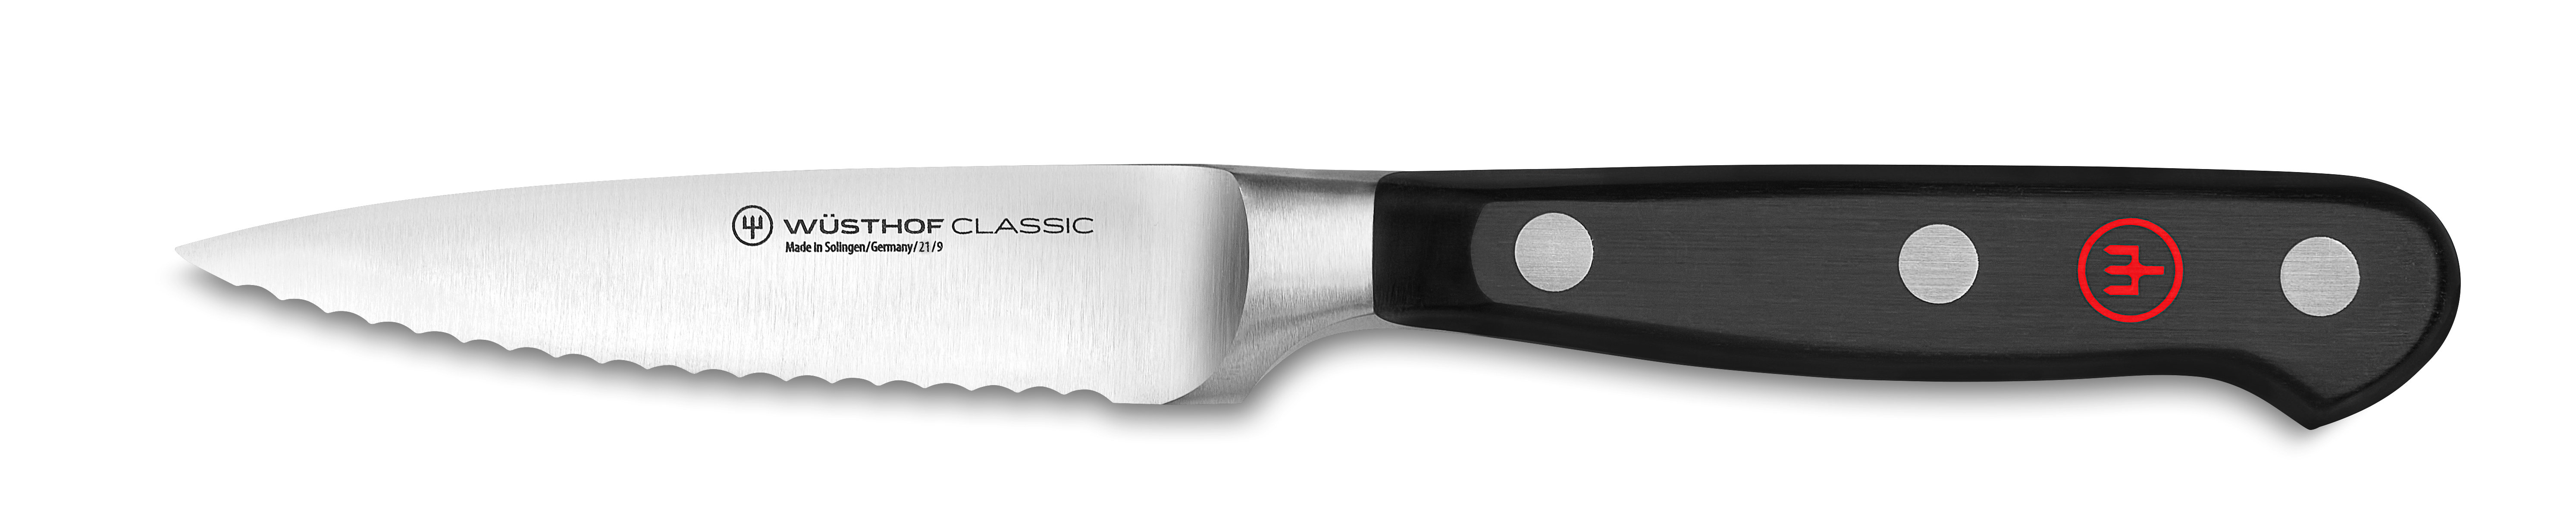 Wüsthof 3.54 Classic Serrated Paring Knife & Reviews